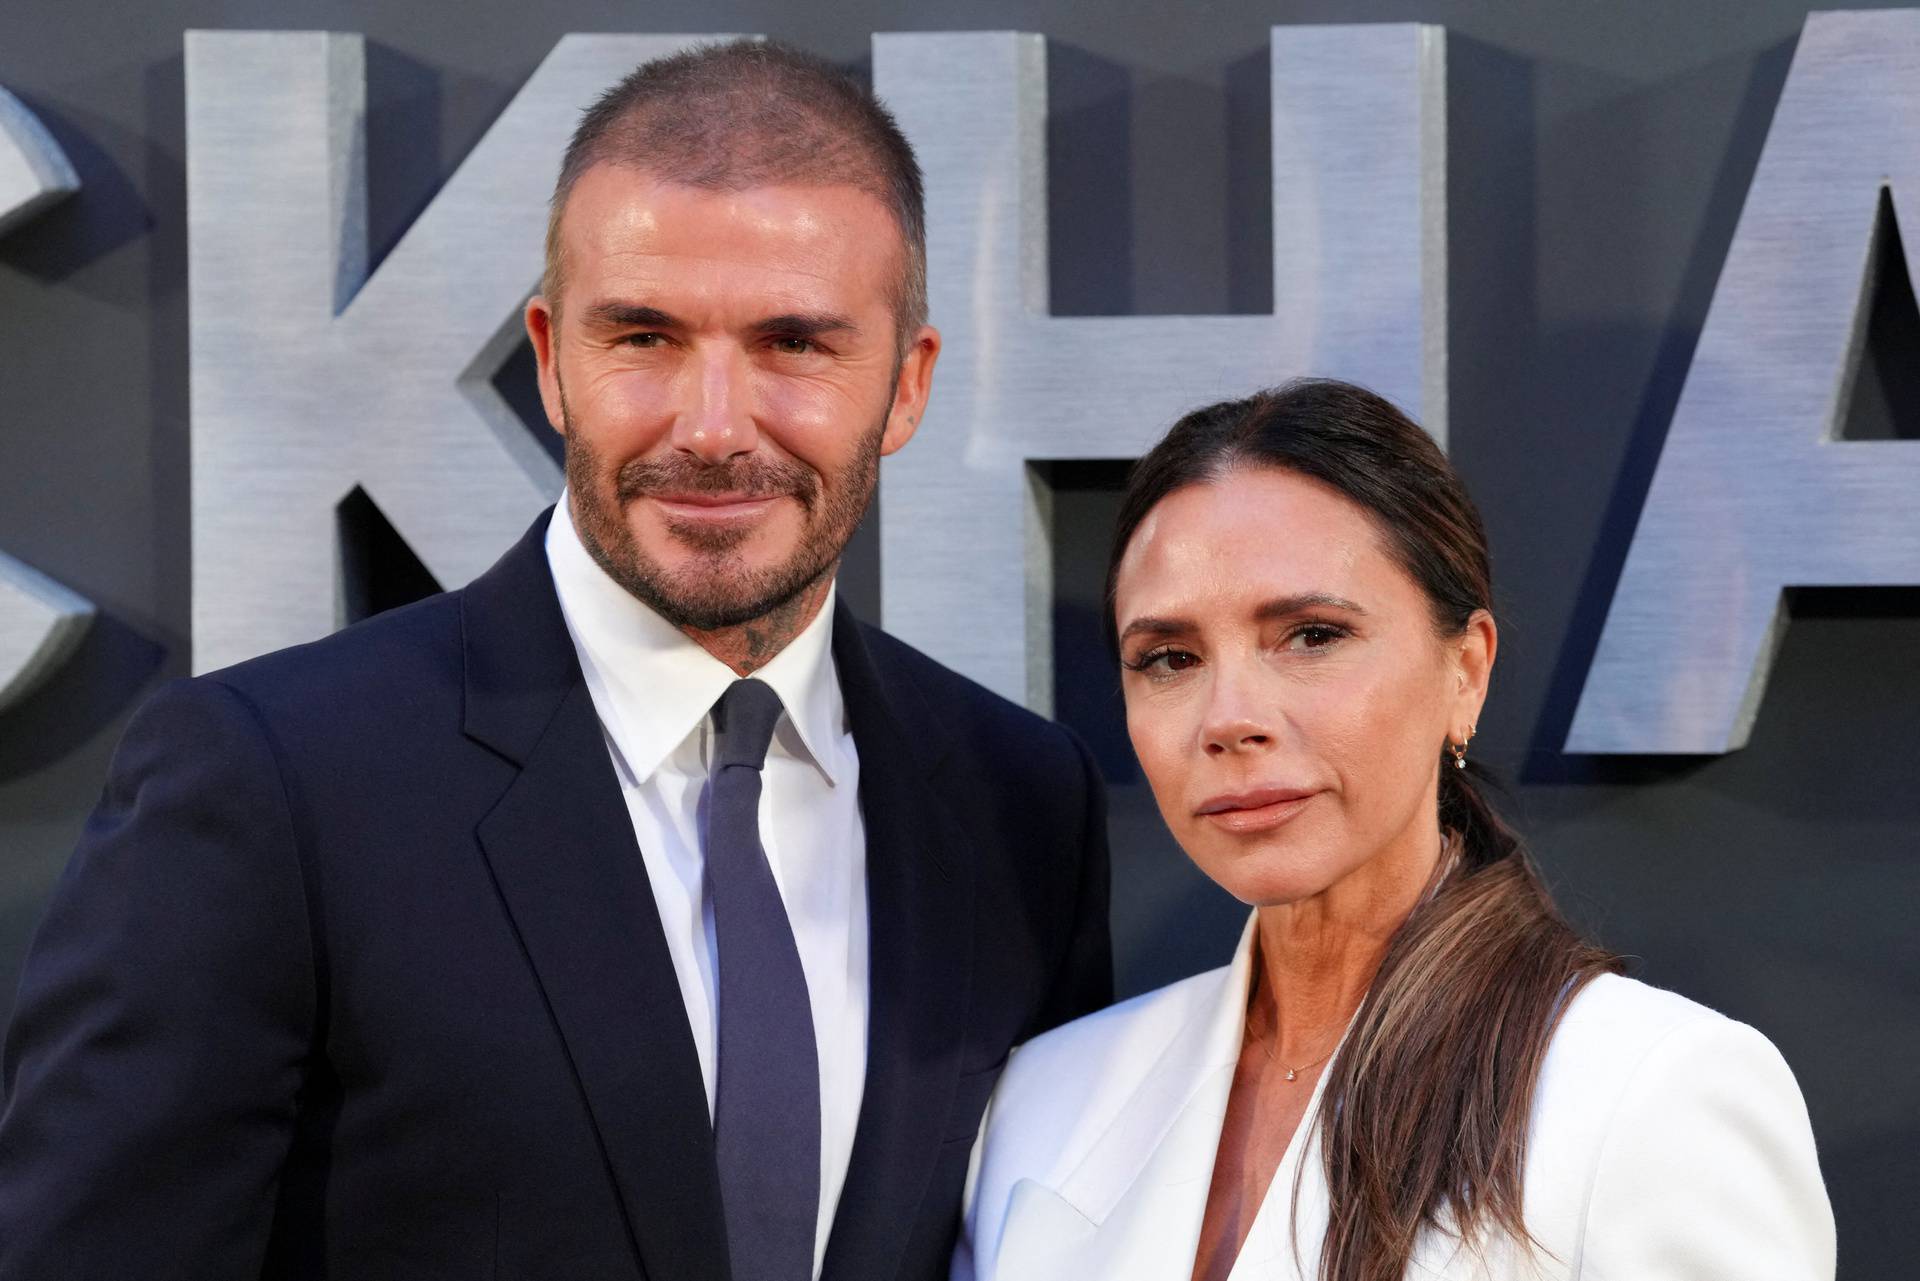 David Beckham and family premiere his new Netflix show